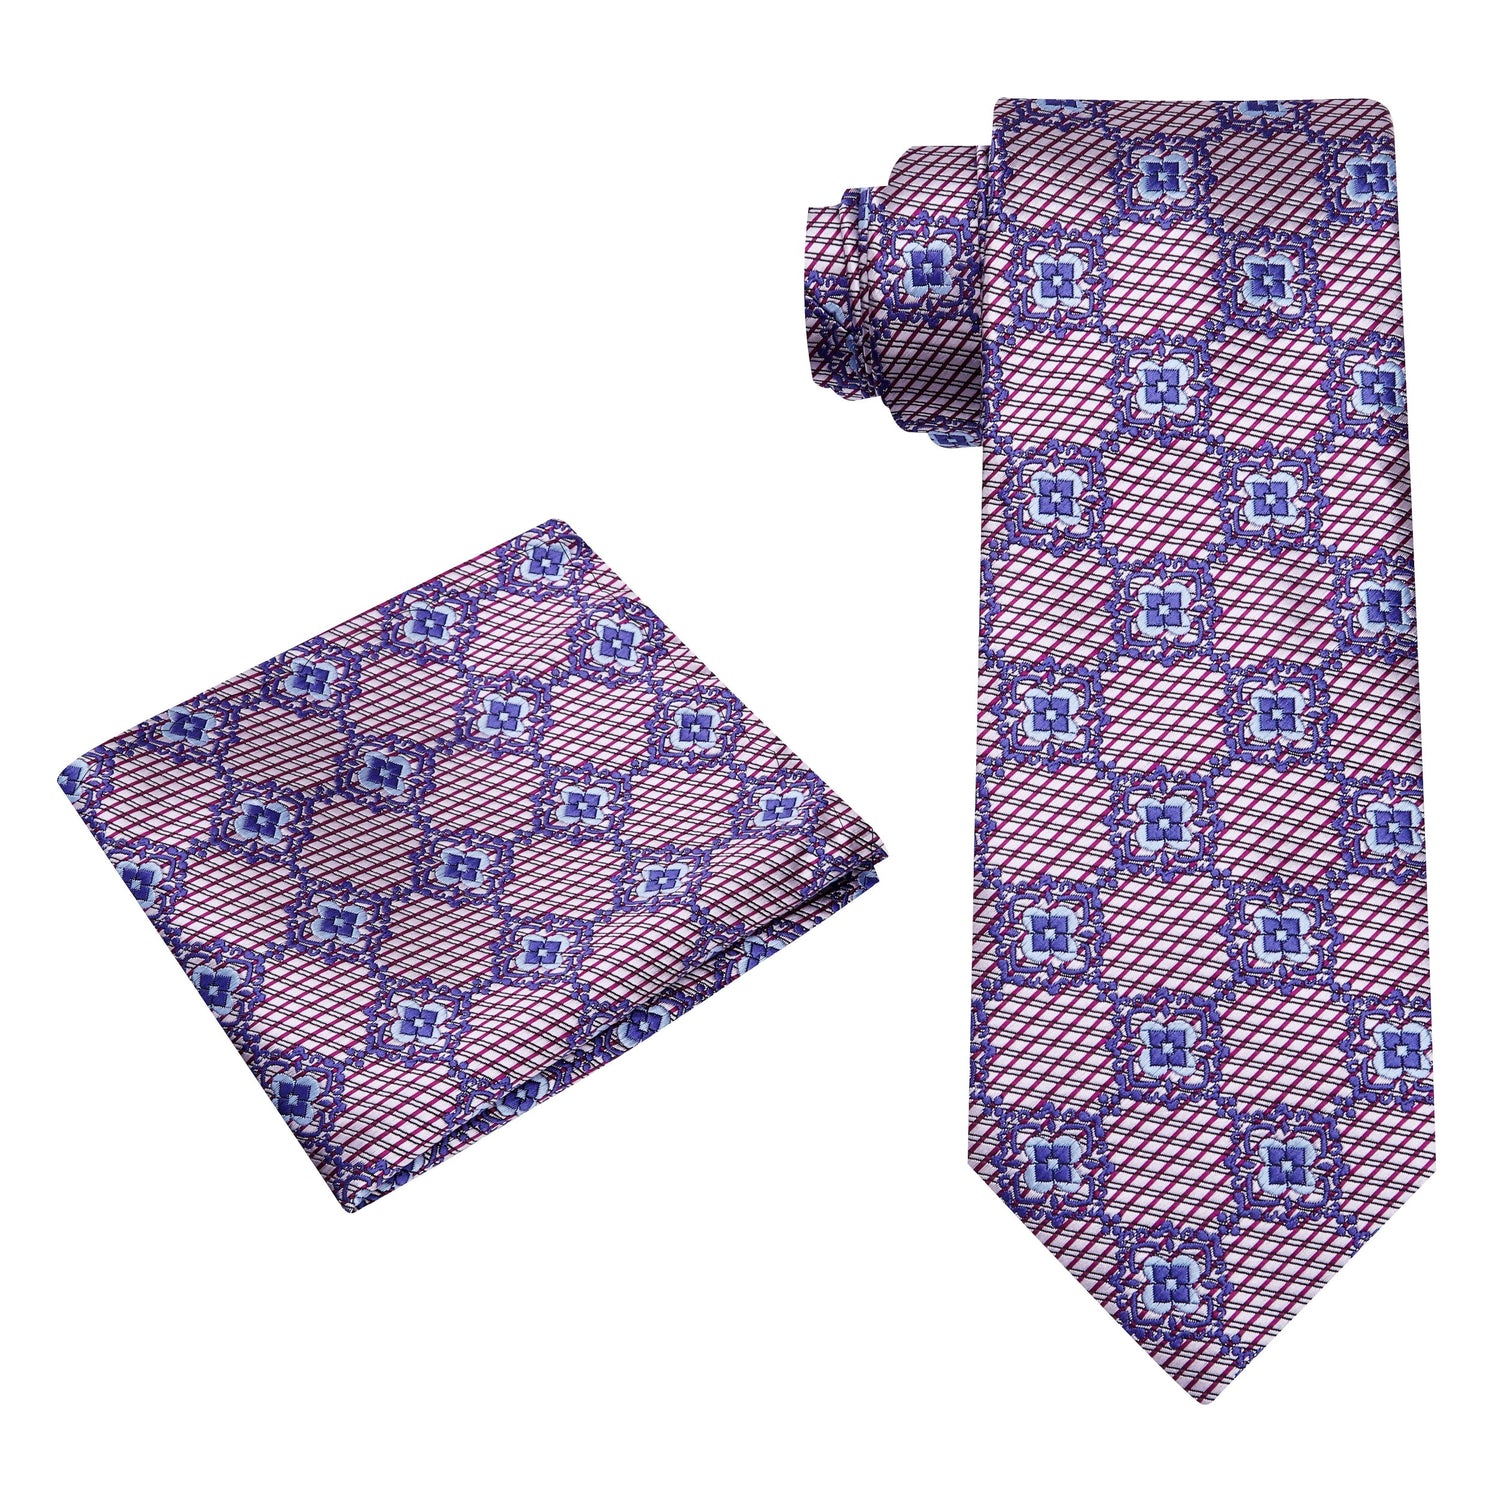 Alt View: A Silver, Scarlet, Purple Geometric Background With Small Flowers Pattern Silk Necktie, Matching Pocket Square